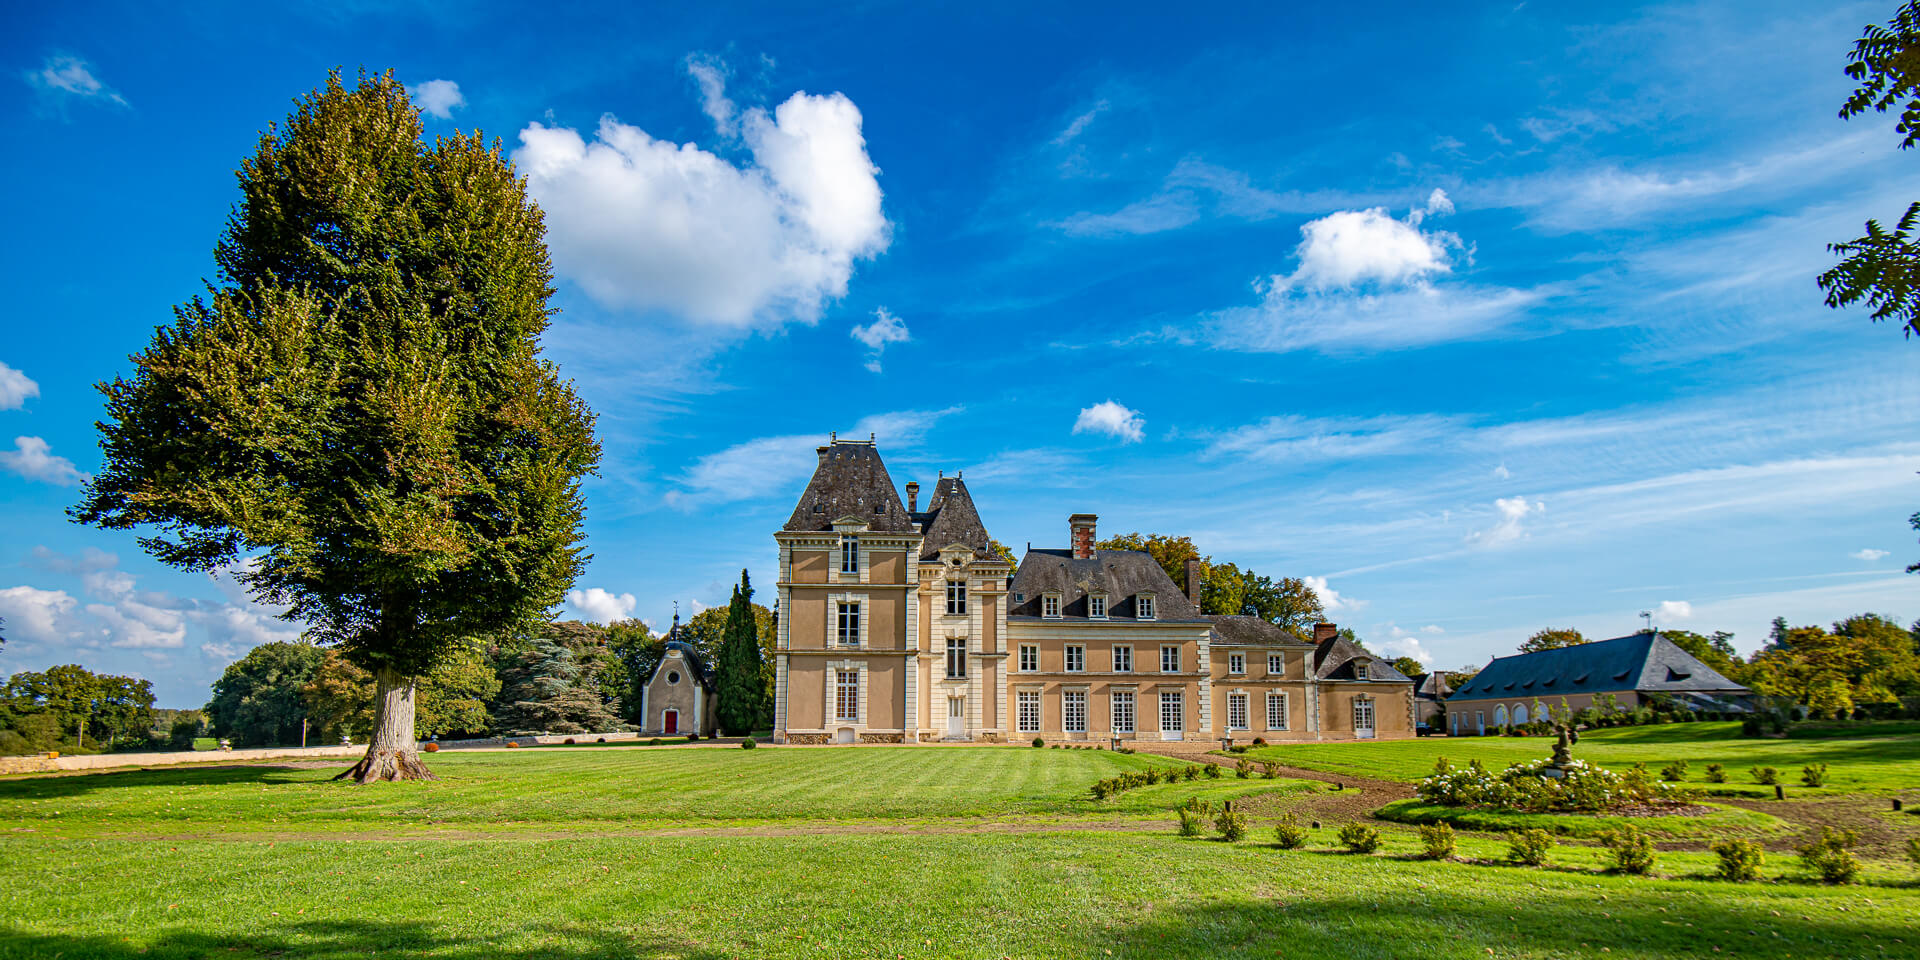 Provide a brief history of the chateaux and their significance